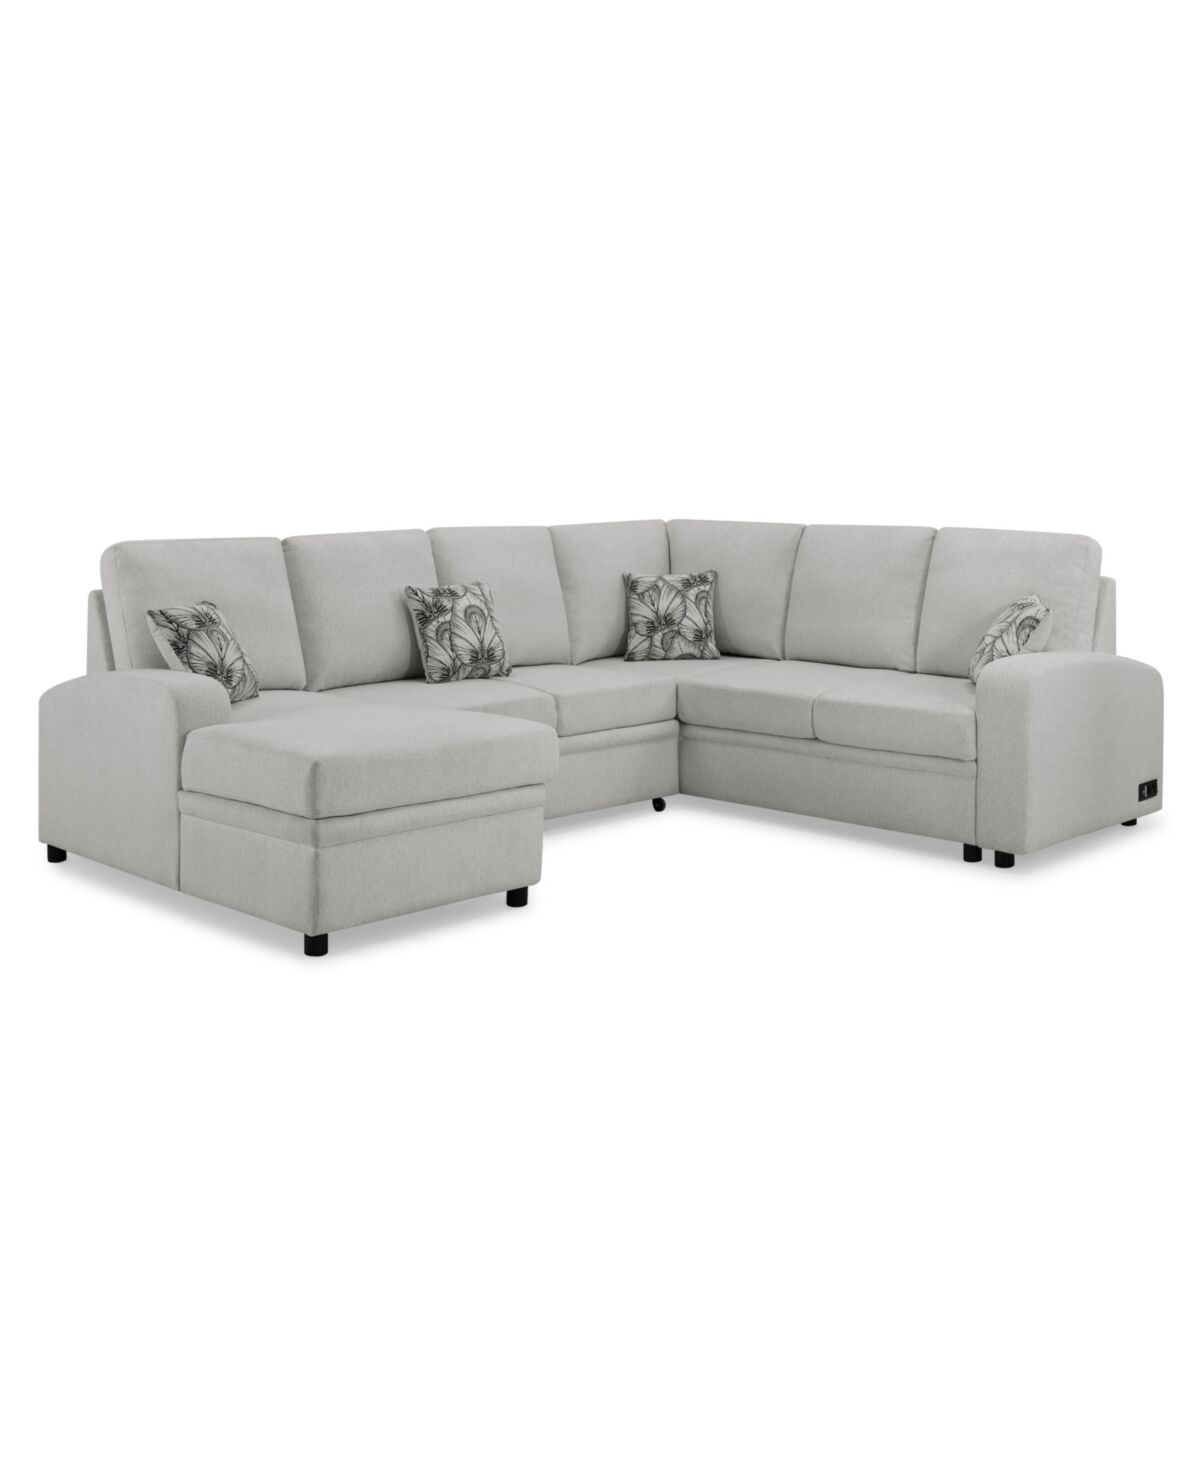 Serta Mae Sectional Sofa with Power and Usb Ports - Ivory